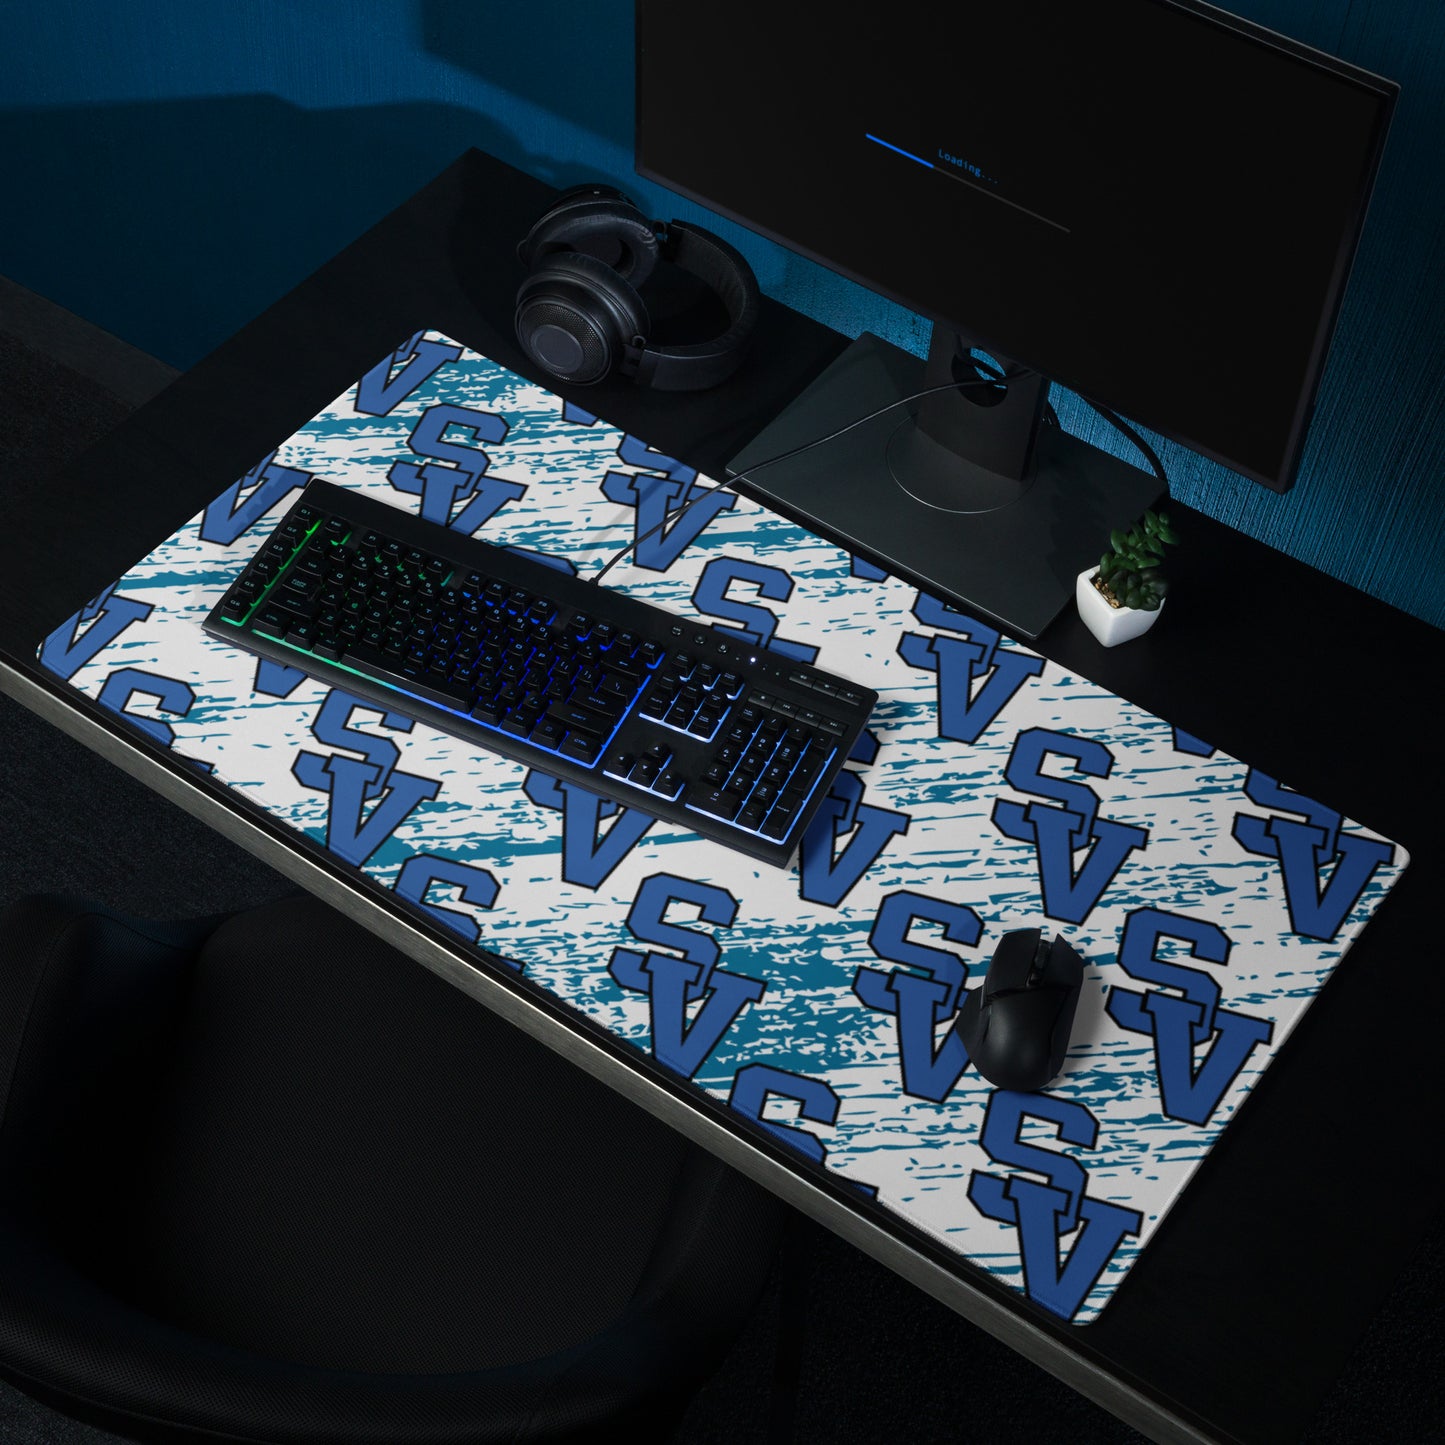 Desktop mouse pad - Shelby Valley High School